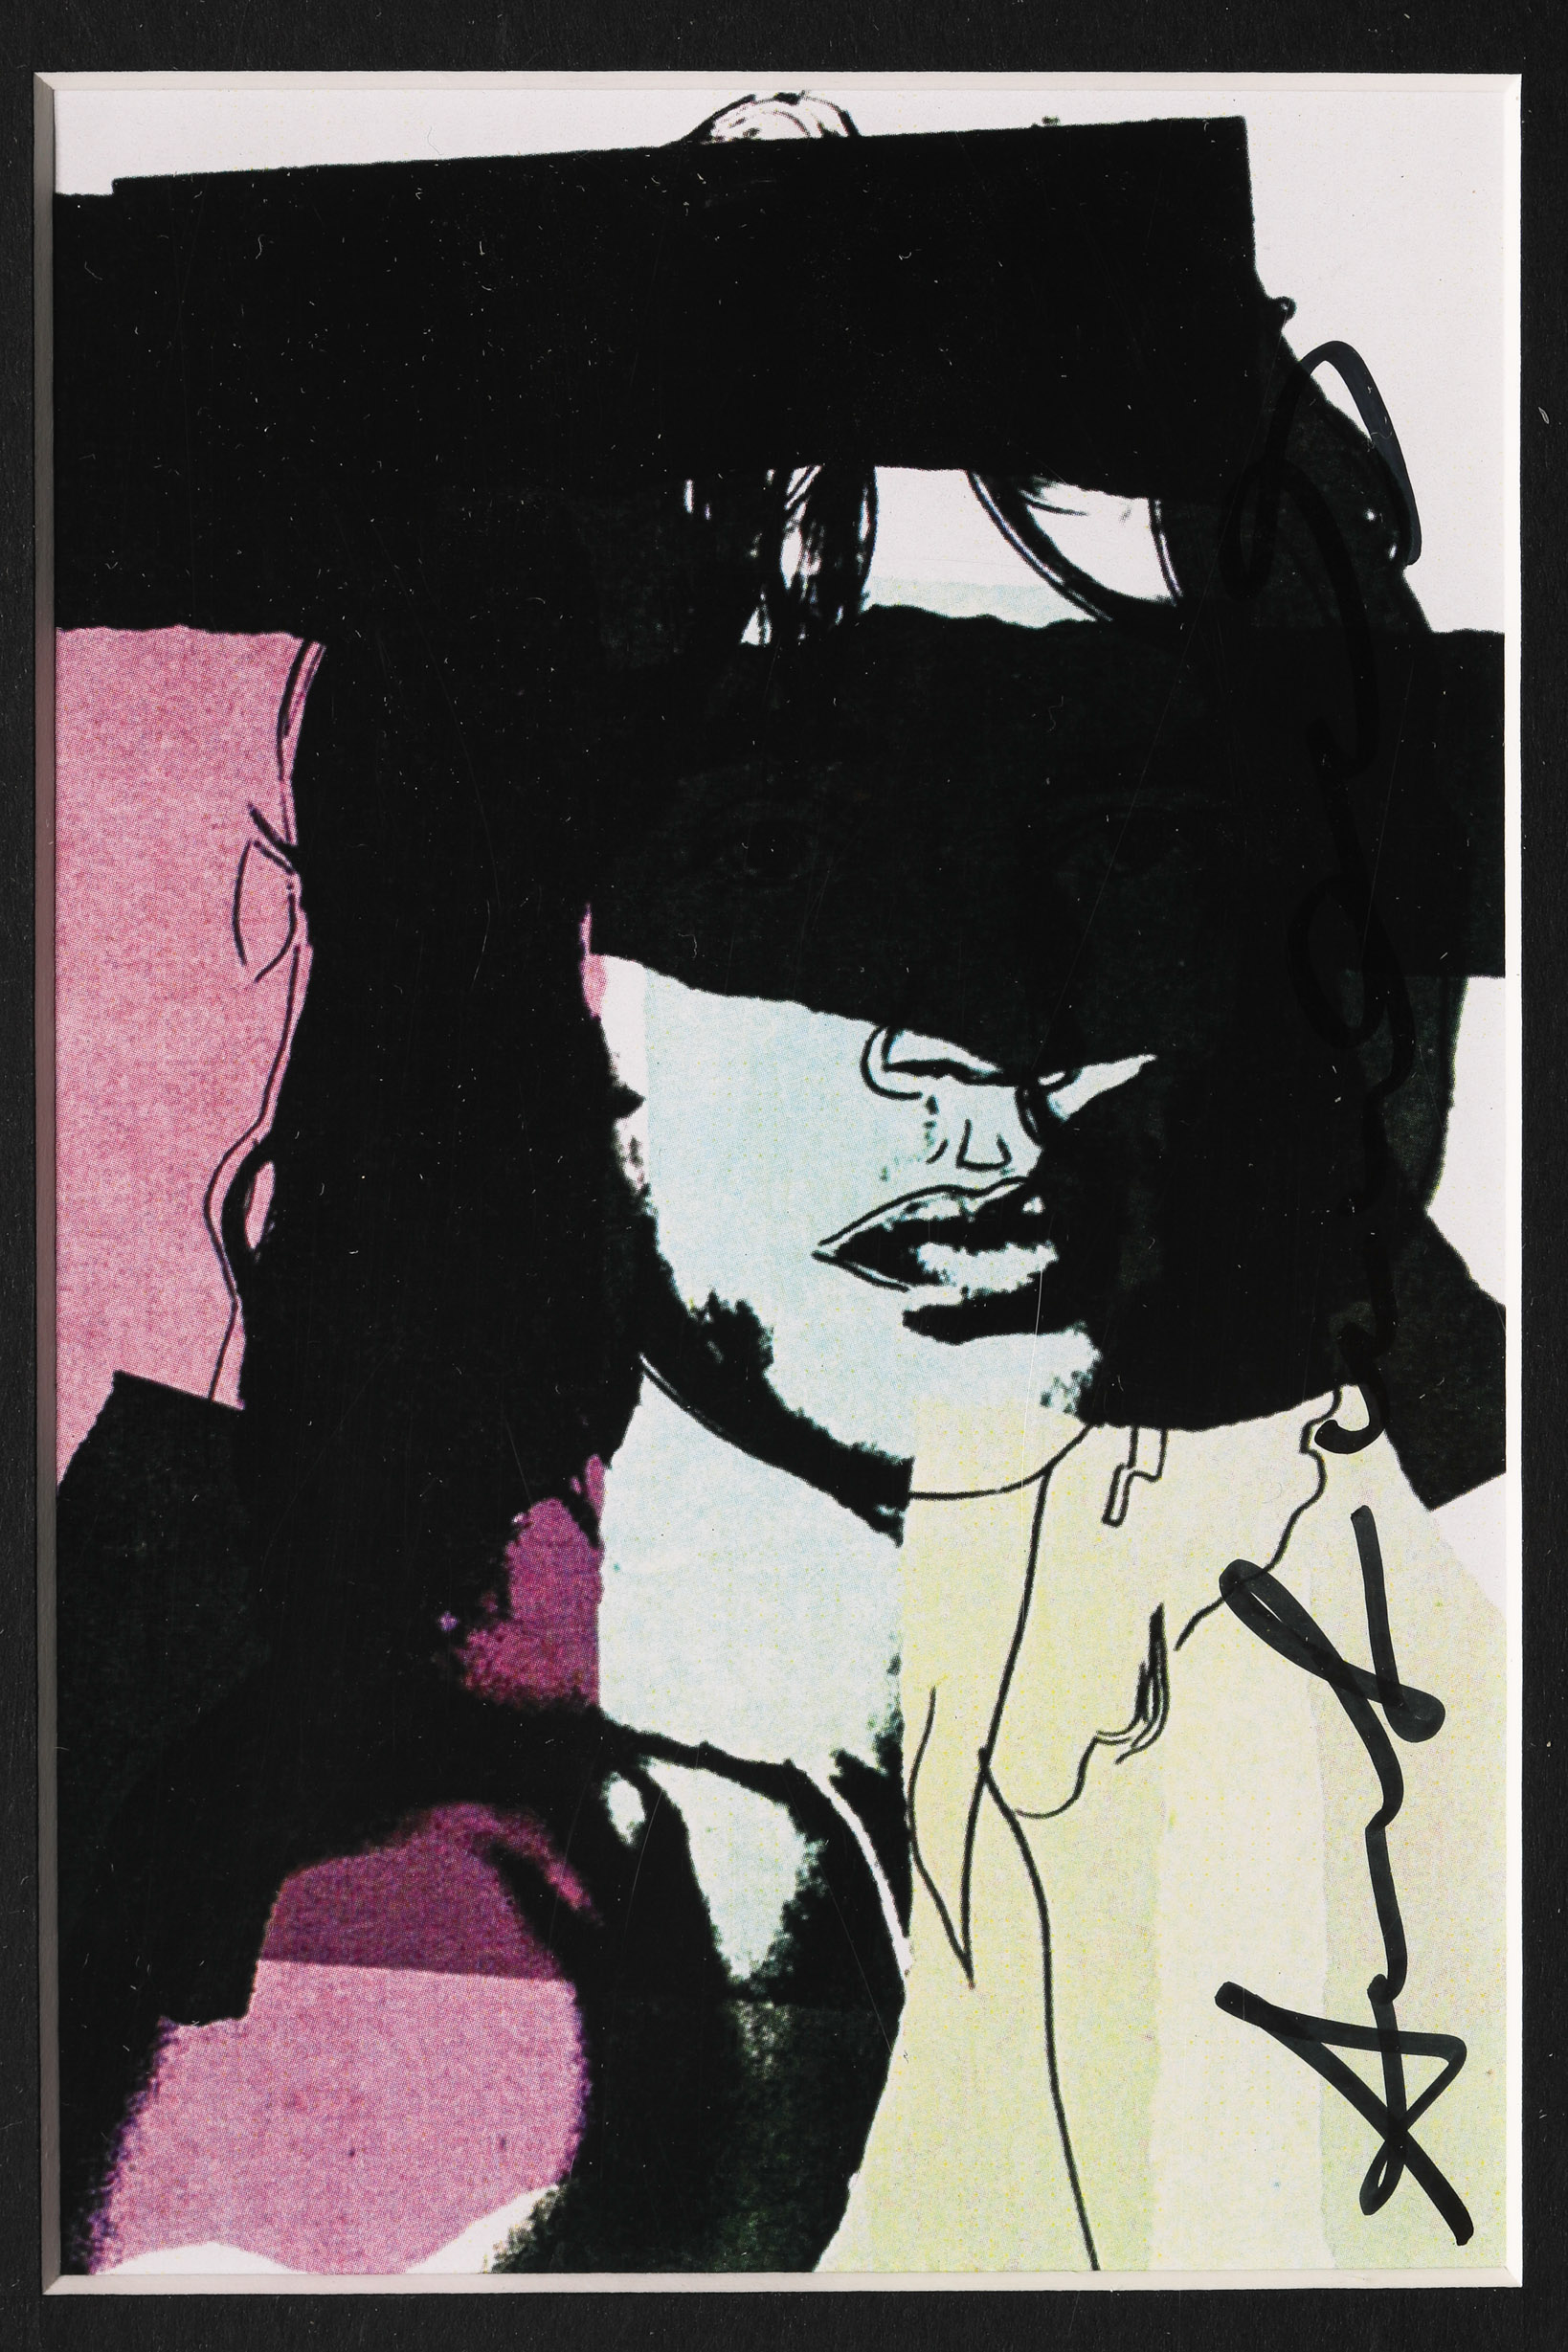 Andy Warhol, Mini Portfolio Mick Jagger with 10 Prints, 1975, signed - Image 12 of 16